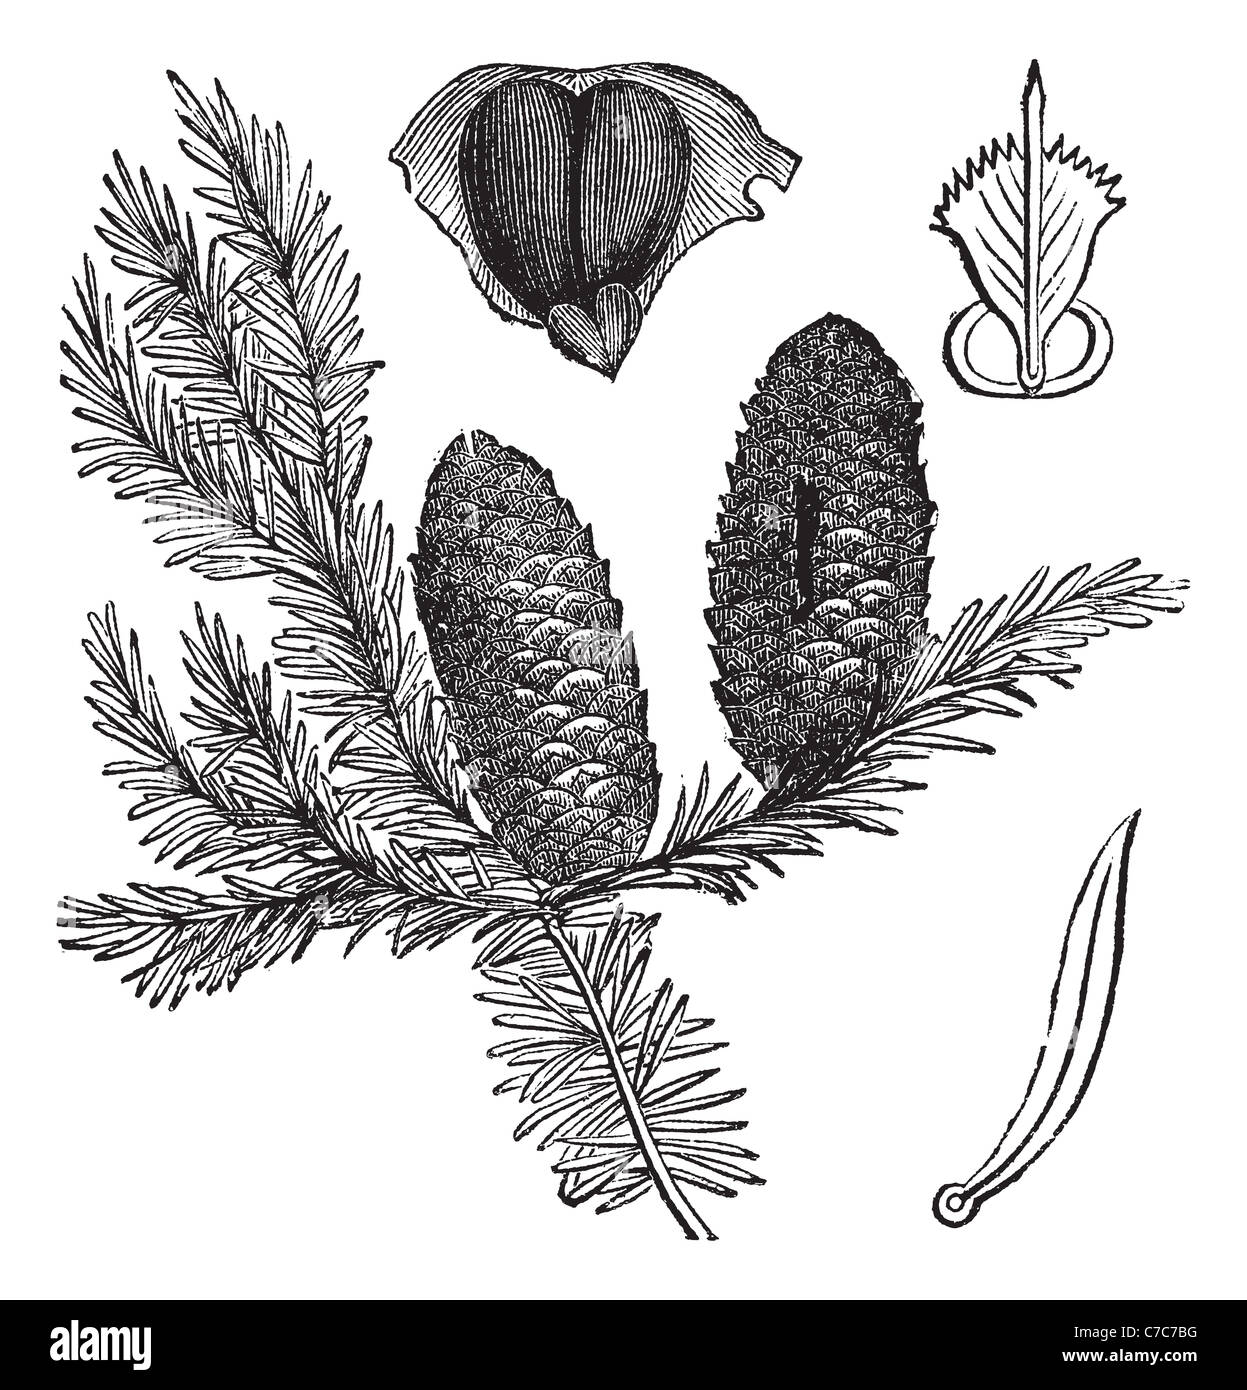 Balsam fir or Abies balsamea, vintage engraving. Old engraved illustration of Balsam fir isolated on a white background. Stock Photo